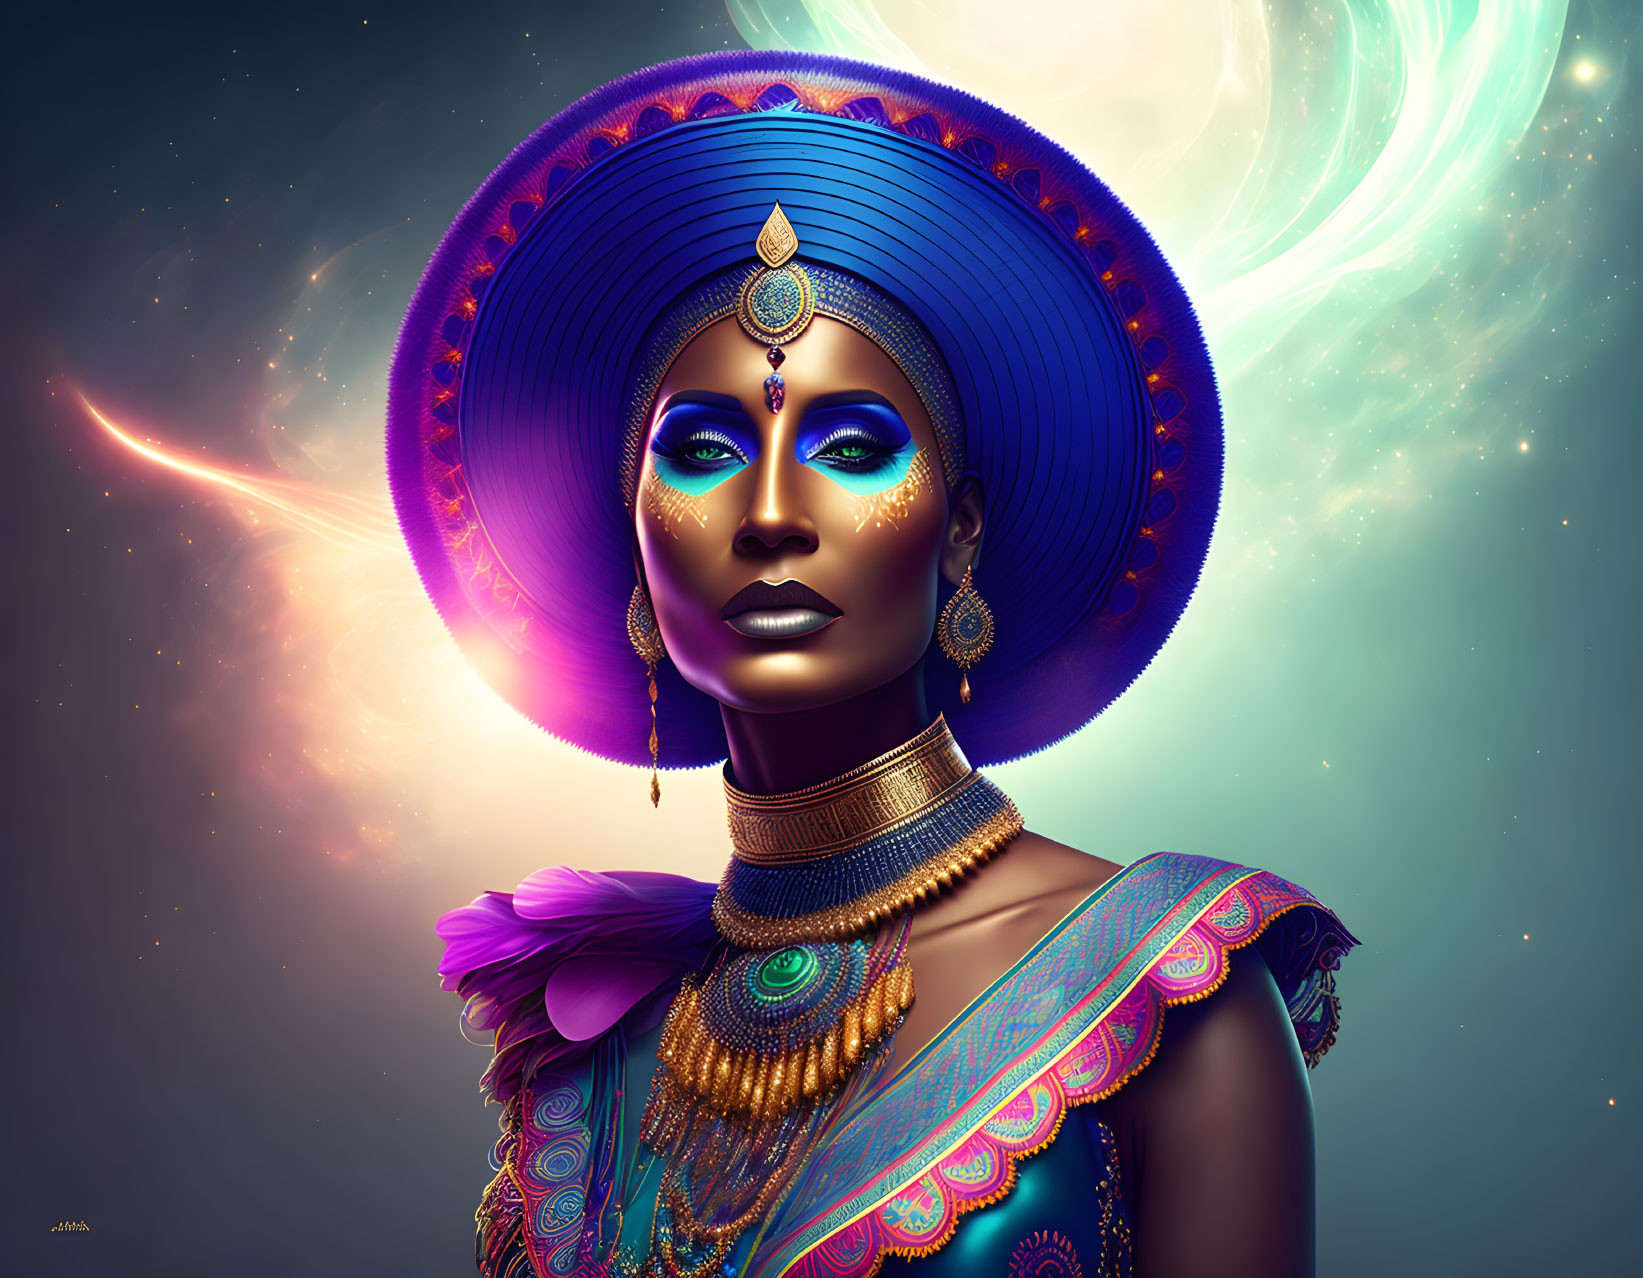 Colorful digital portrait of a woman in blue hat and gold jewelry on cosmic background